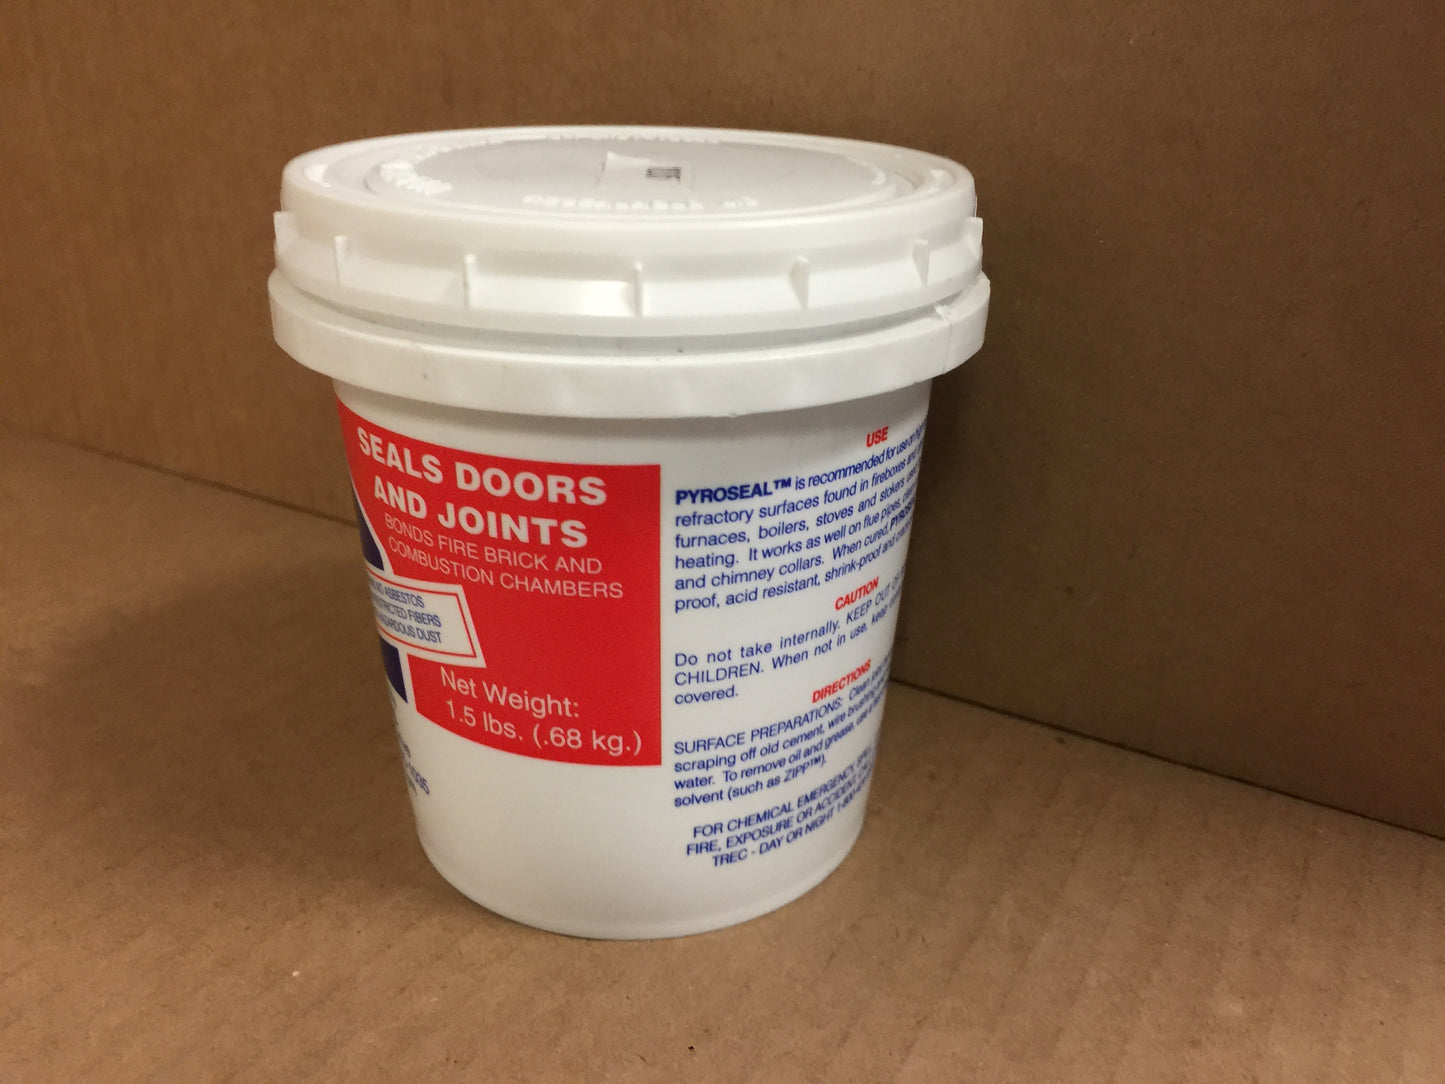 1.5LBS DUAL PURPOSE RETORT AND FURNACE CEMENT